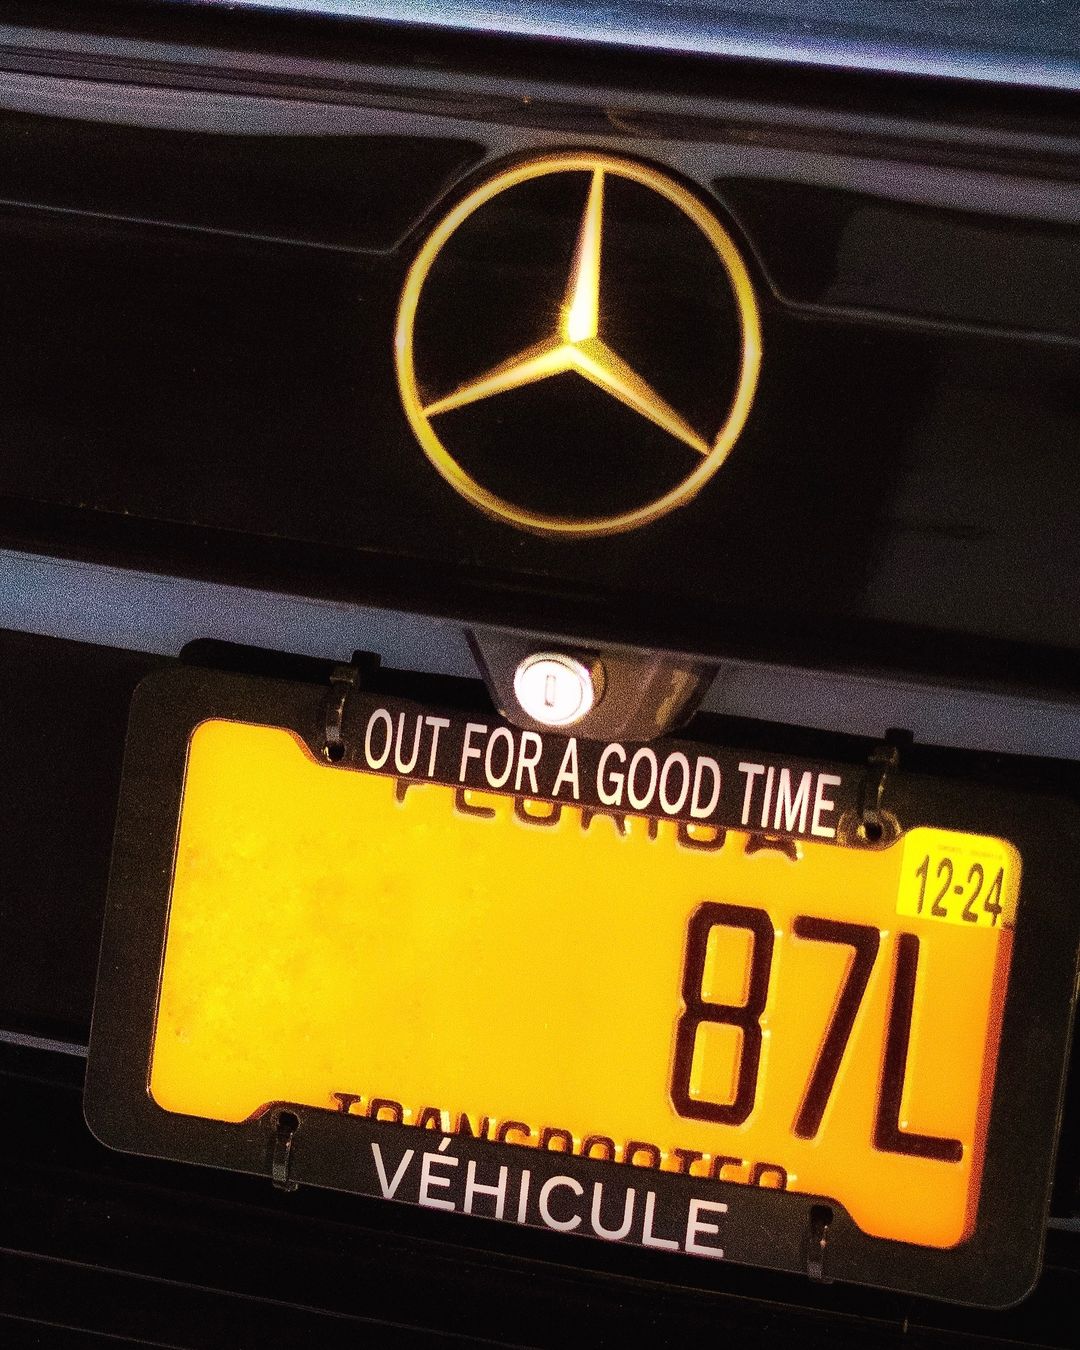 OUT FOR A GOOD TIME MERCH LICENCE PLATE FRAME